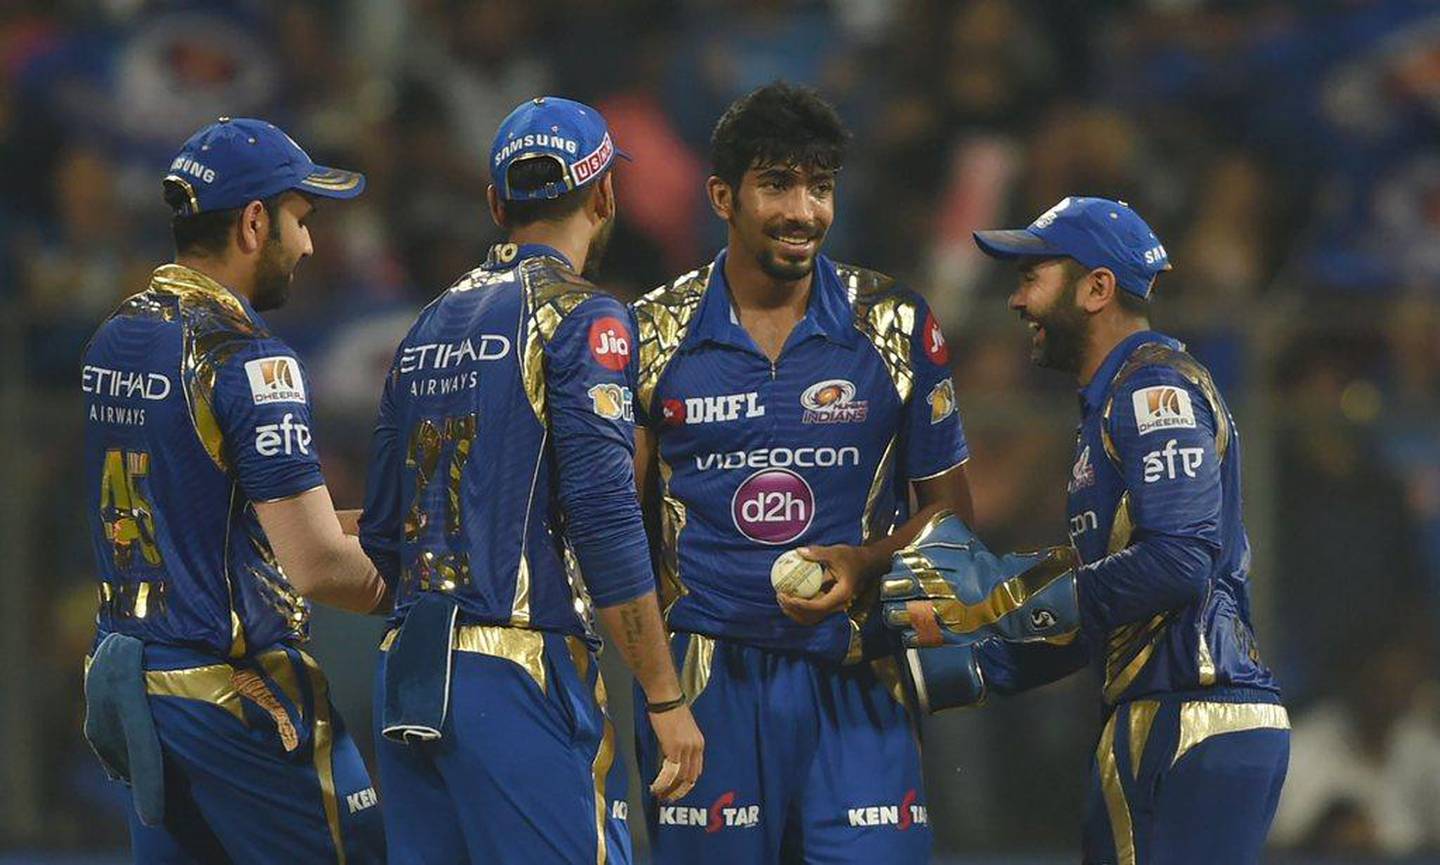 Mumbai Indians' Jasprit Bumrah, second right, ha emerged one of the best fast bowlers in his country. Indranil Mukherjee / AFP